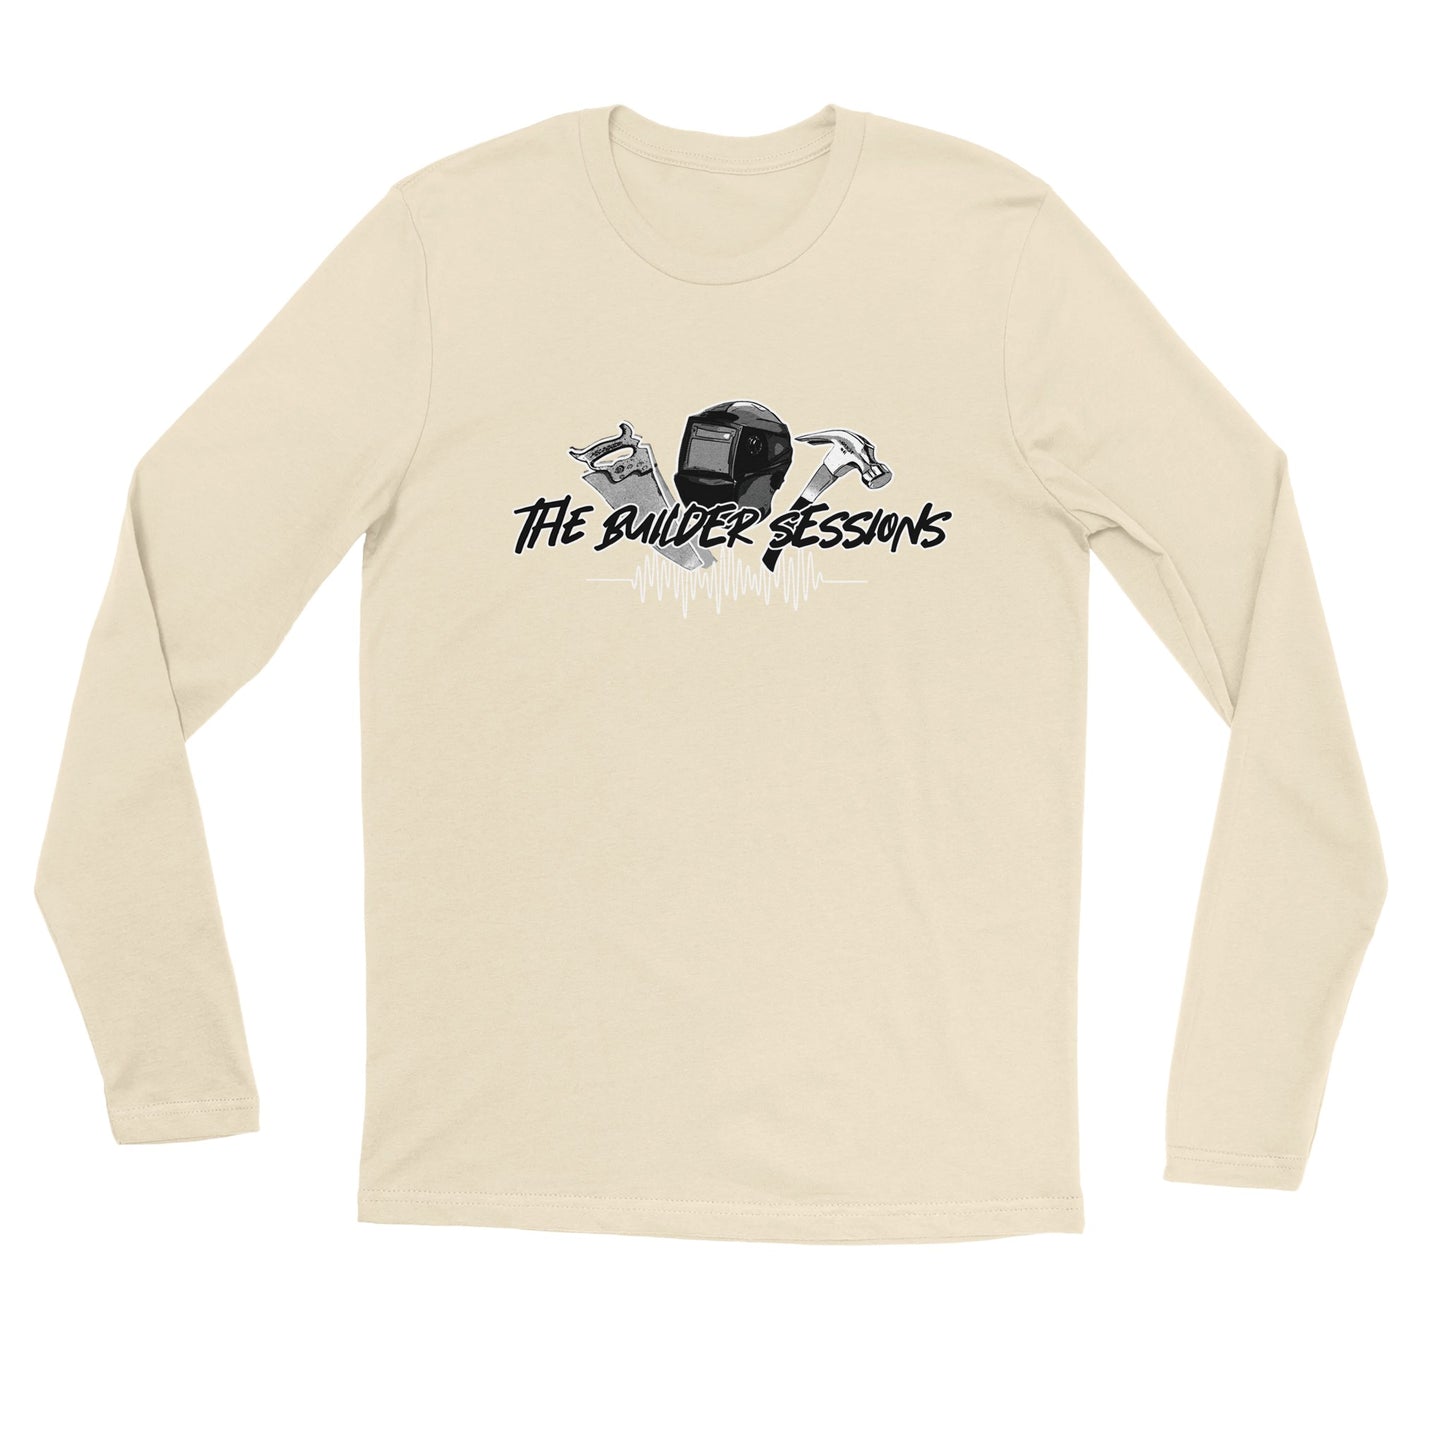 The Builder Sessions Longsleeve T-shirt